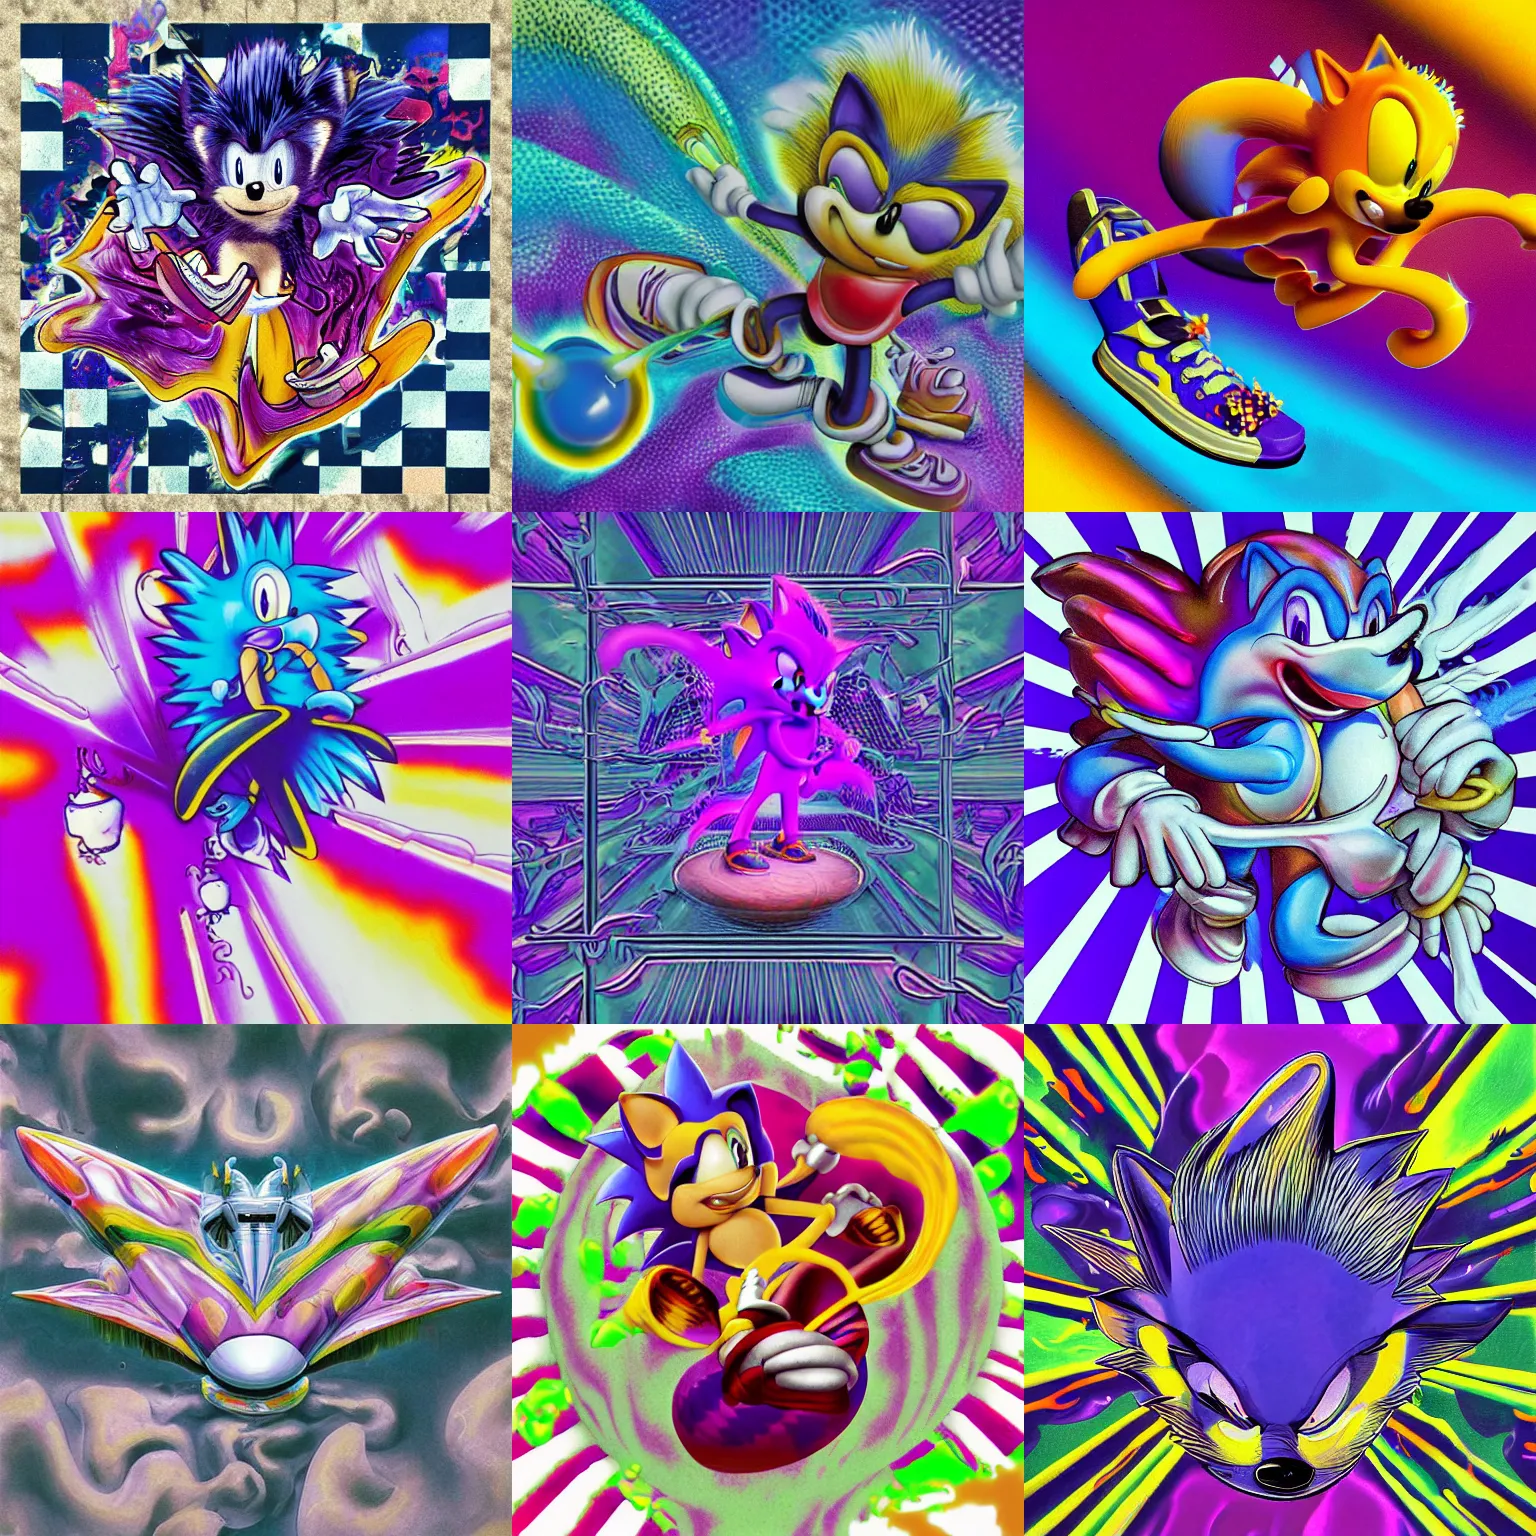 Prompt: surreal, faded, detailed professional, high quality airbrush art MGMT album cover of a liquid dissolving LSD DMT sonic the hedgehog on a flat purple checkerboard plane, 1990s 1992 prerendered graphics raytraced phong shaded album cover